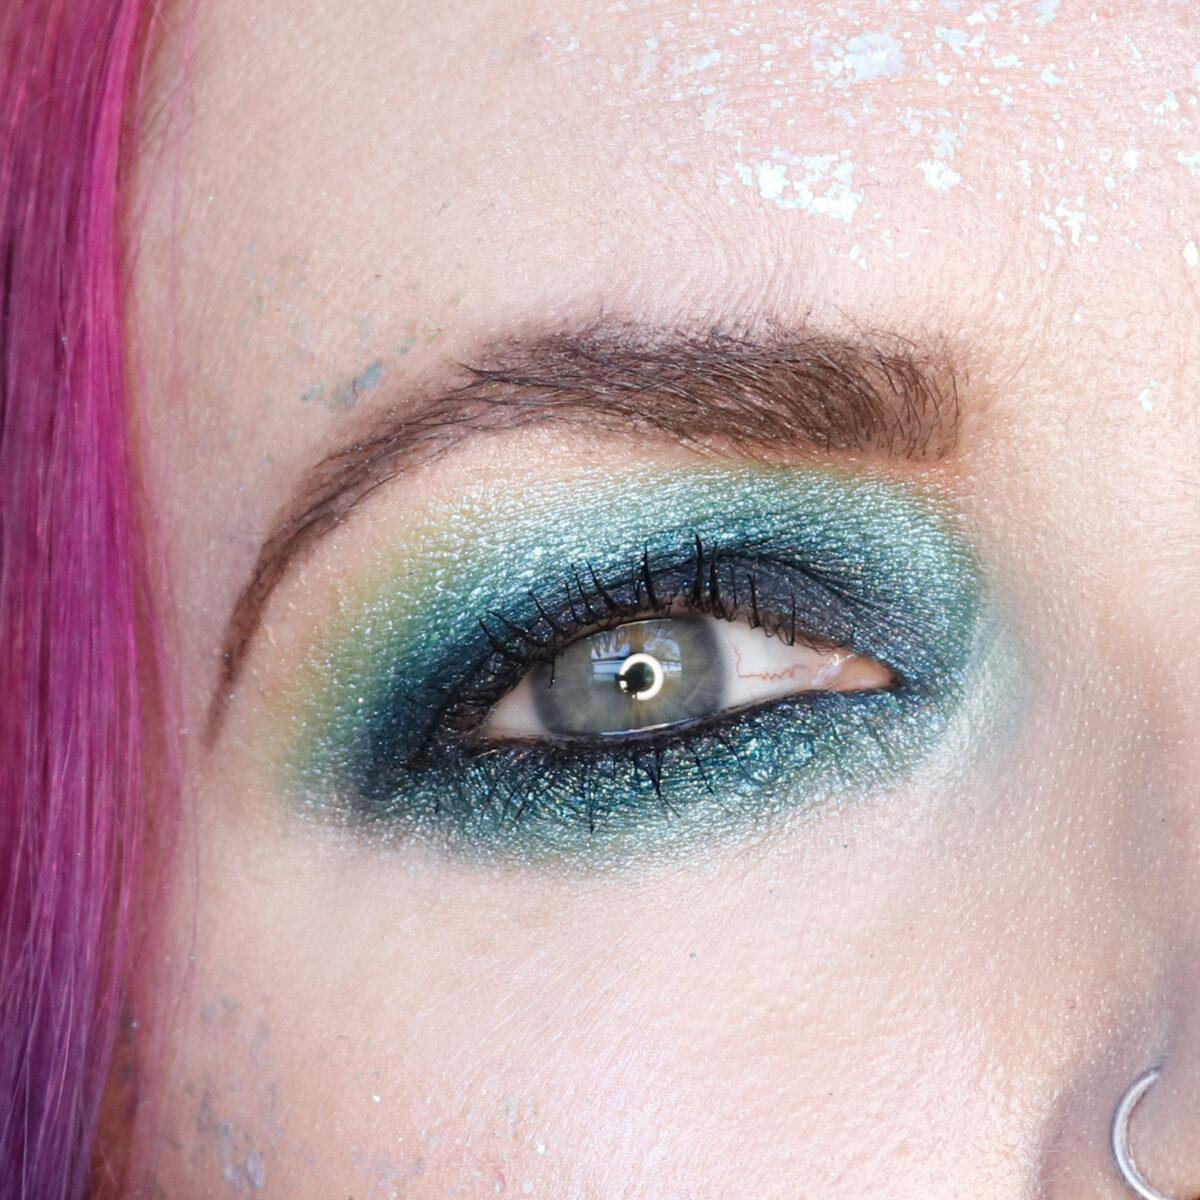 Lethal Cosmetics 1UP palette was used to create a black to navy blue to icy teal and green eye